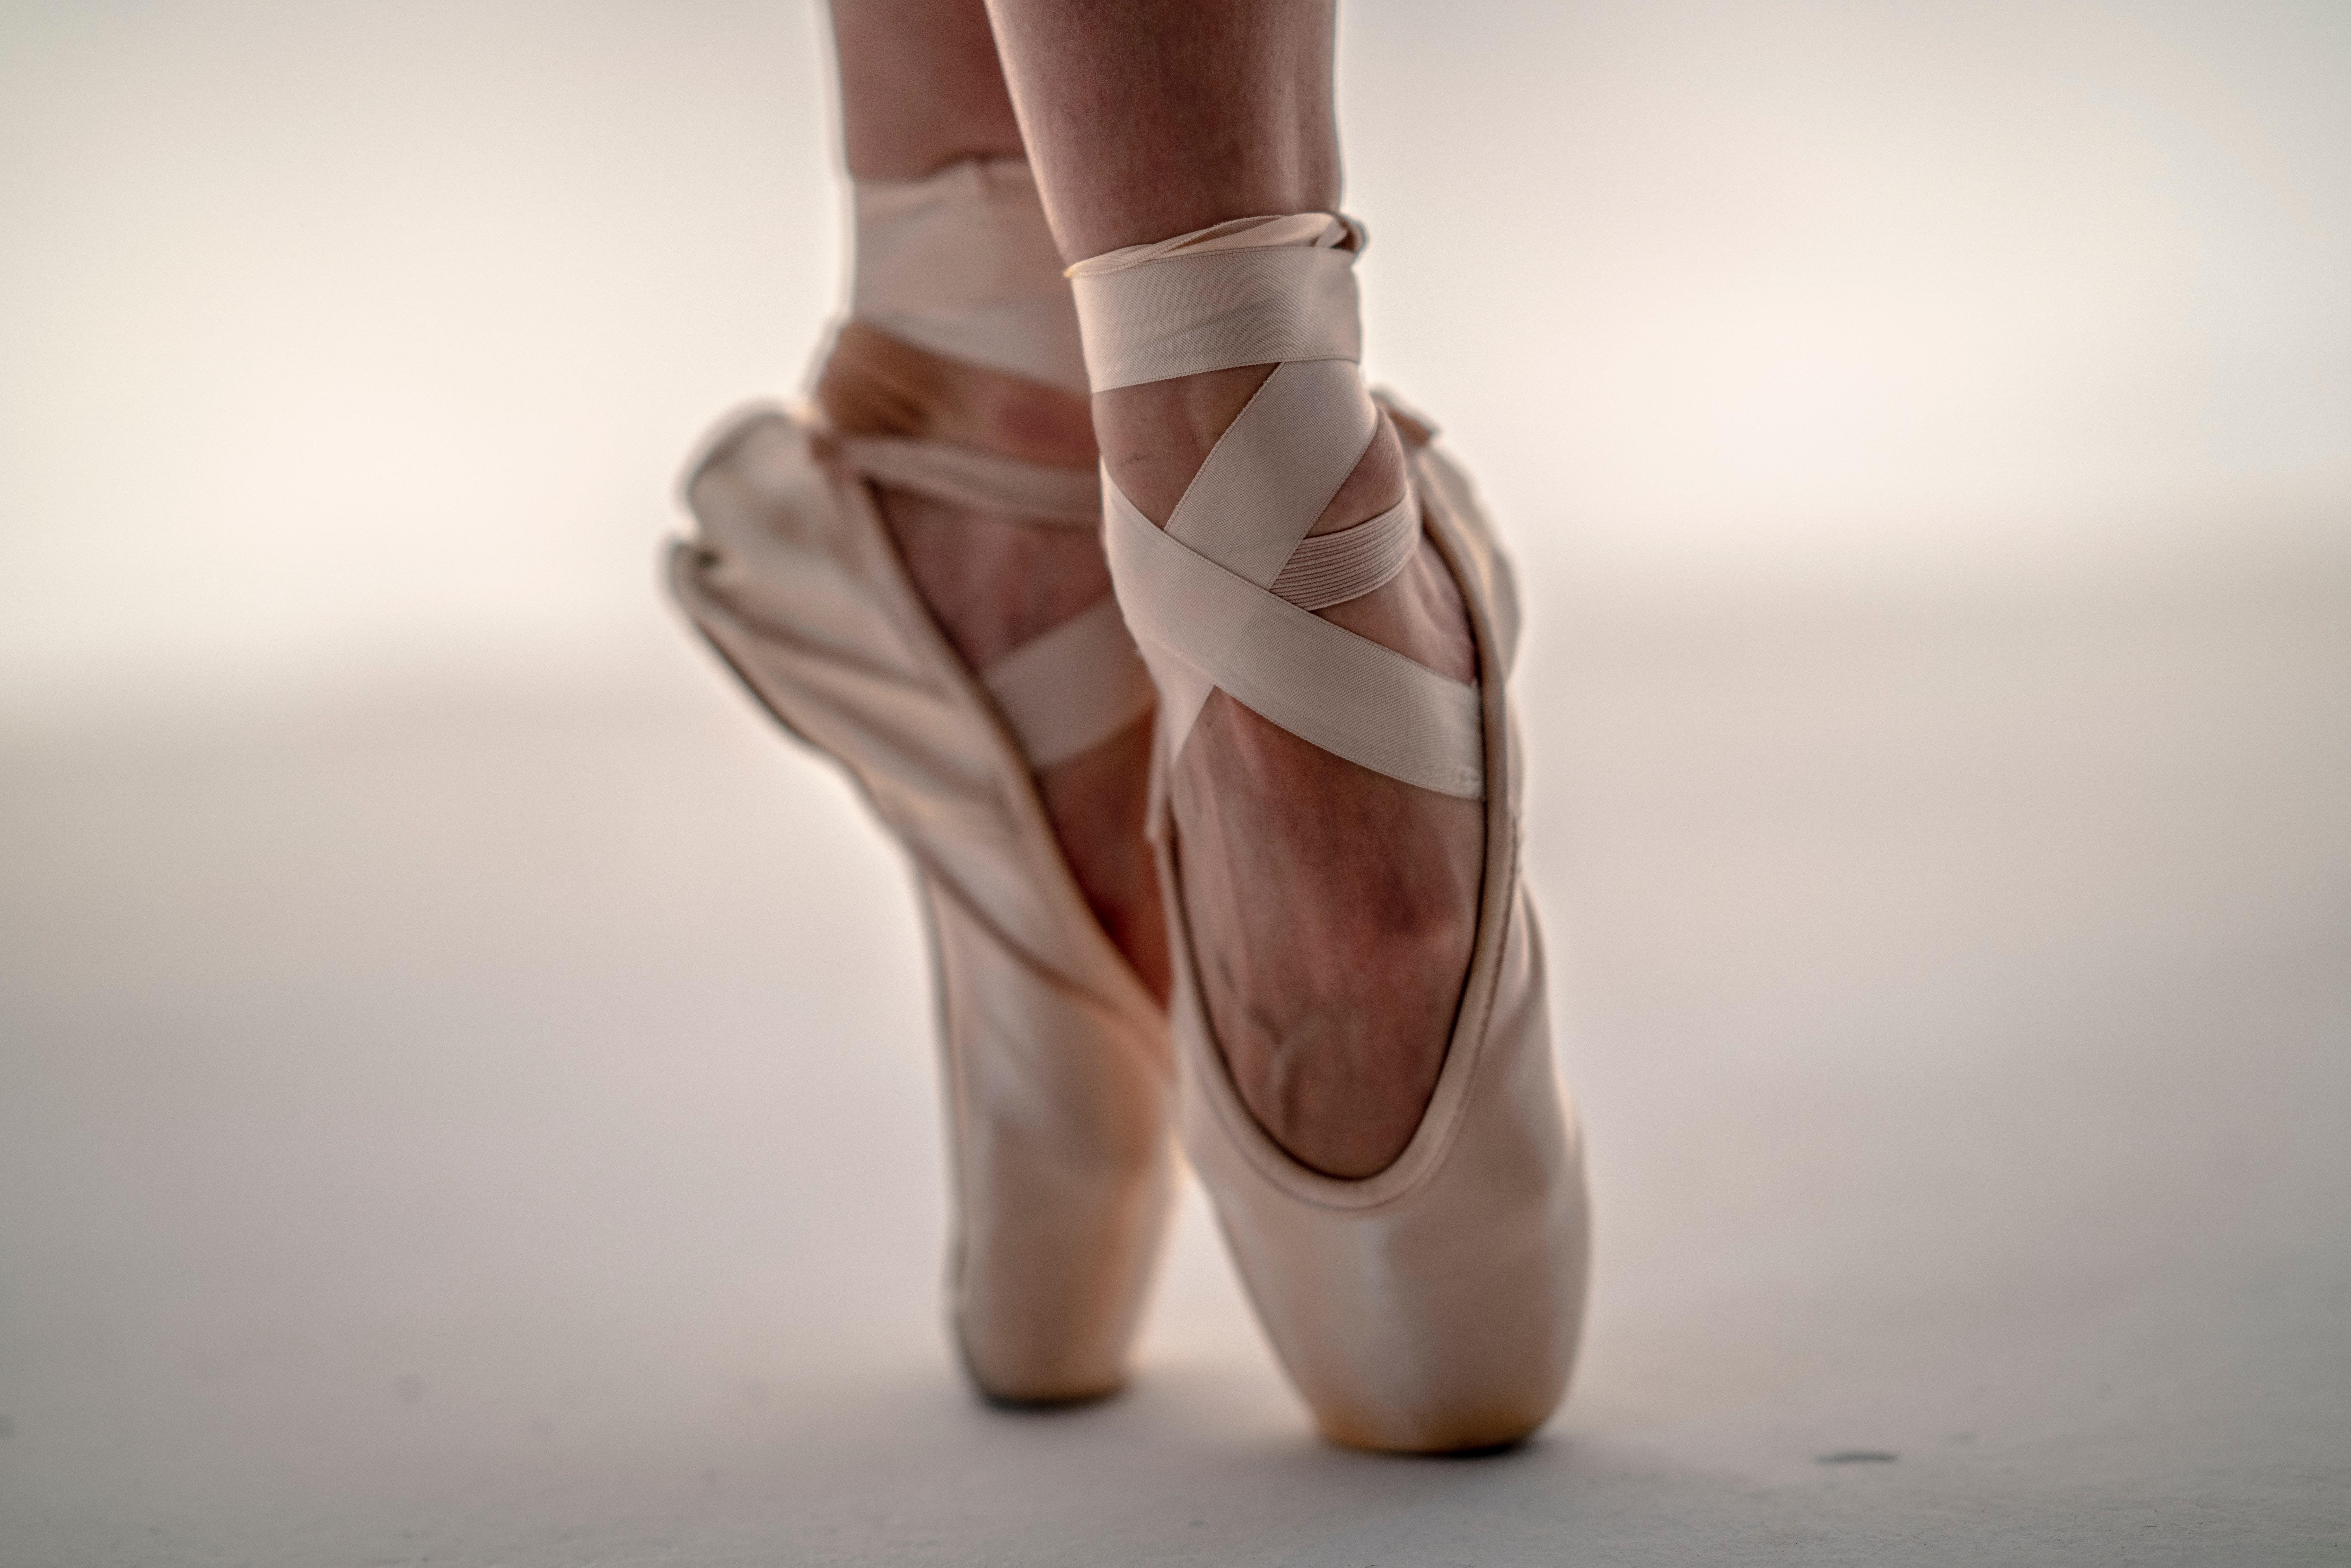 Ballerina Feet -Foot Pain caused by Ballet Dancing